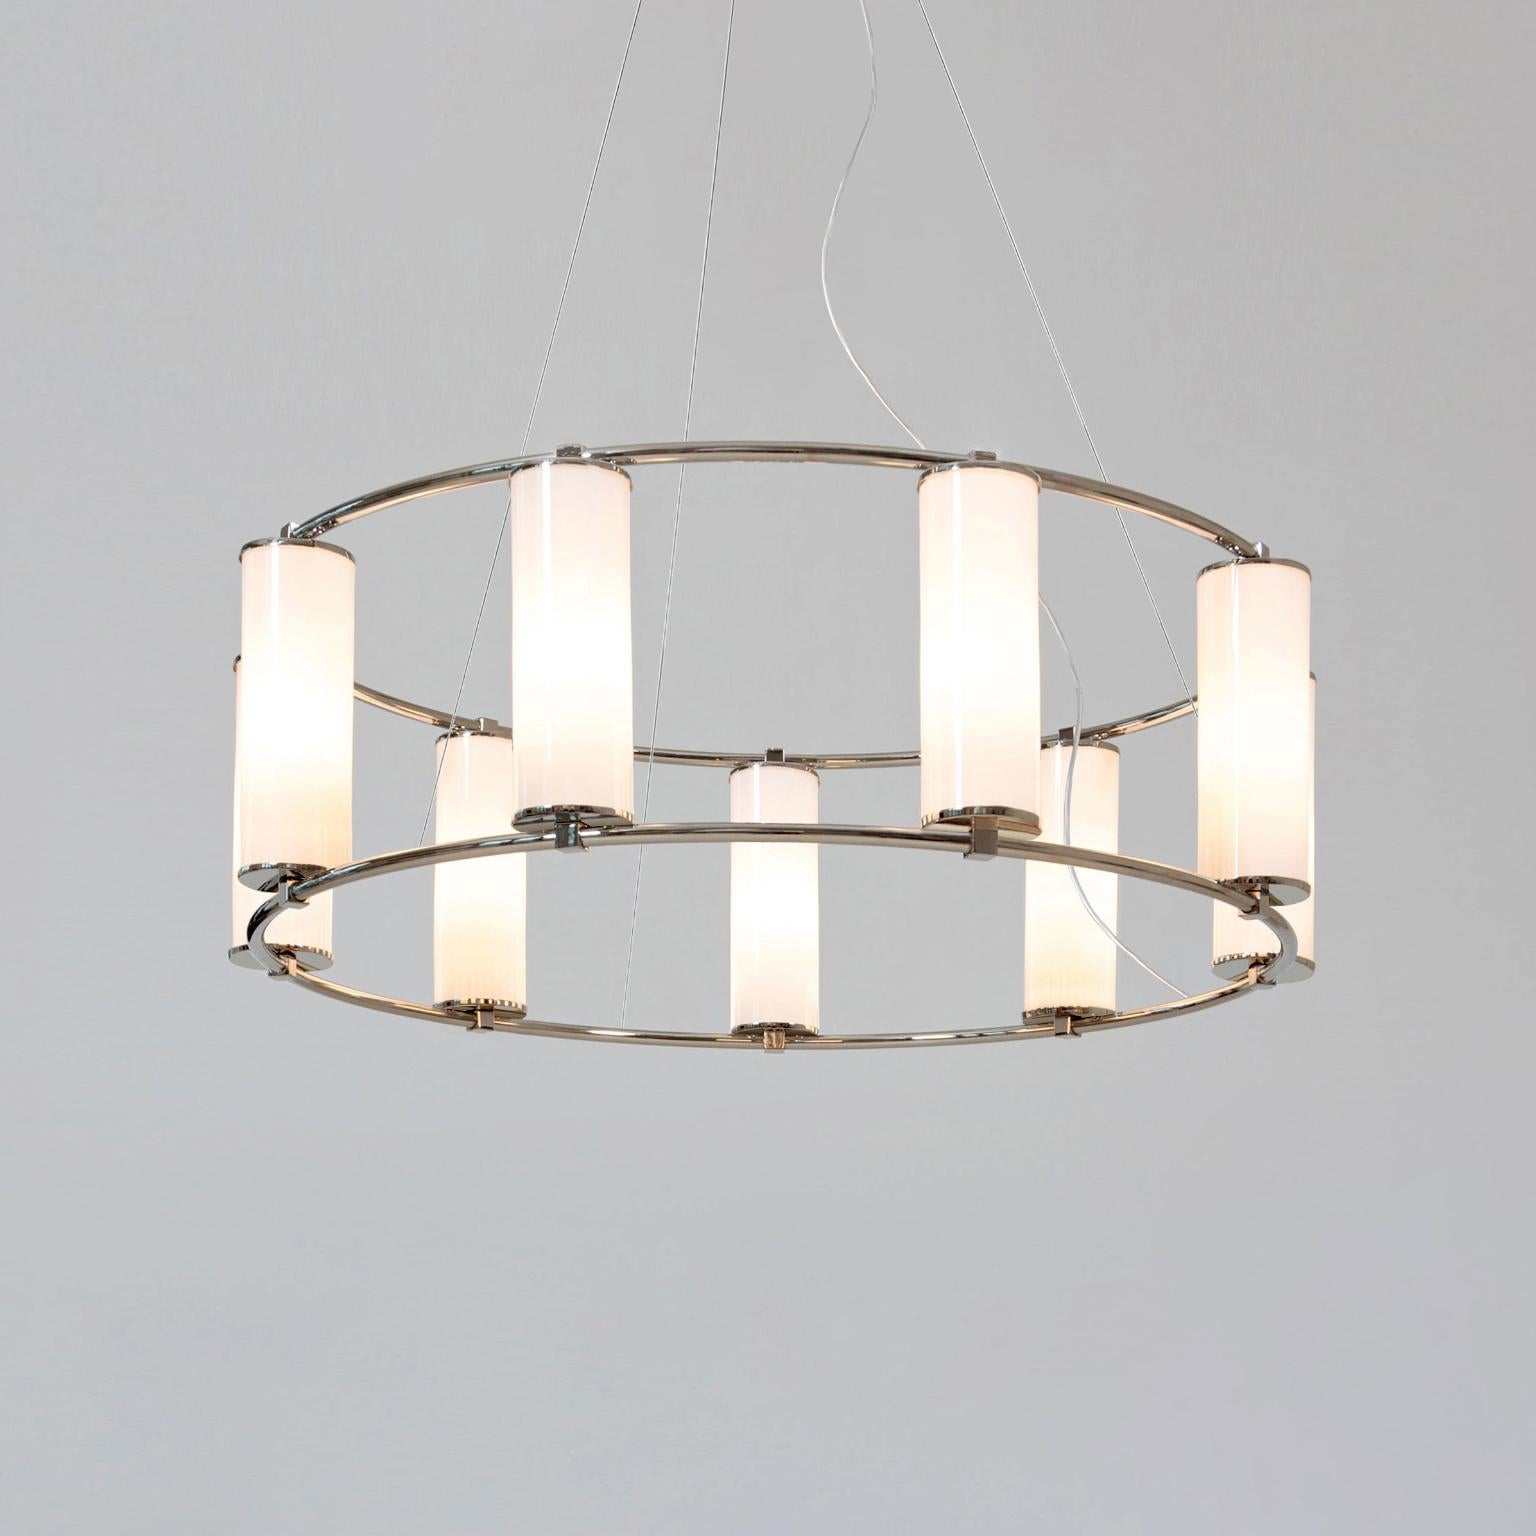 Modernist circular 9-light 'Olympia' chandelier. Nickel-plated brass and opaline glass cylinders, manufactured by GMD Berlin, 2018.

Technical details: 9 sockets E 27, pendant length is variable.